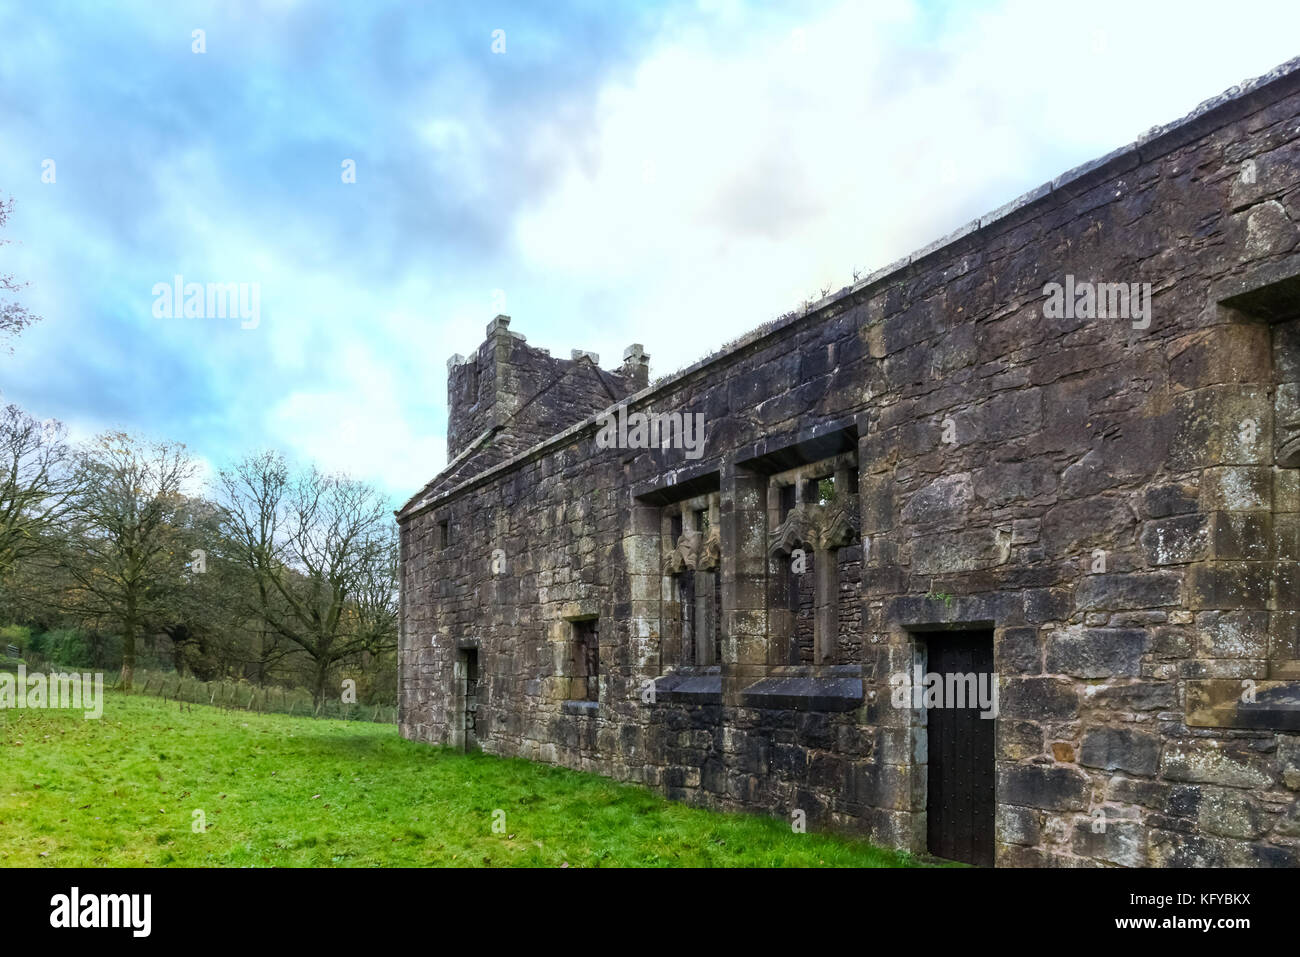 Castle Semple, Lochwinnoch, Scotland-October 28, 2017: Nature Trail at Castle Semple that takes you along past the side of the Collegiate church now i Stock Photo